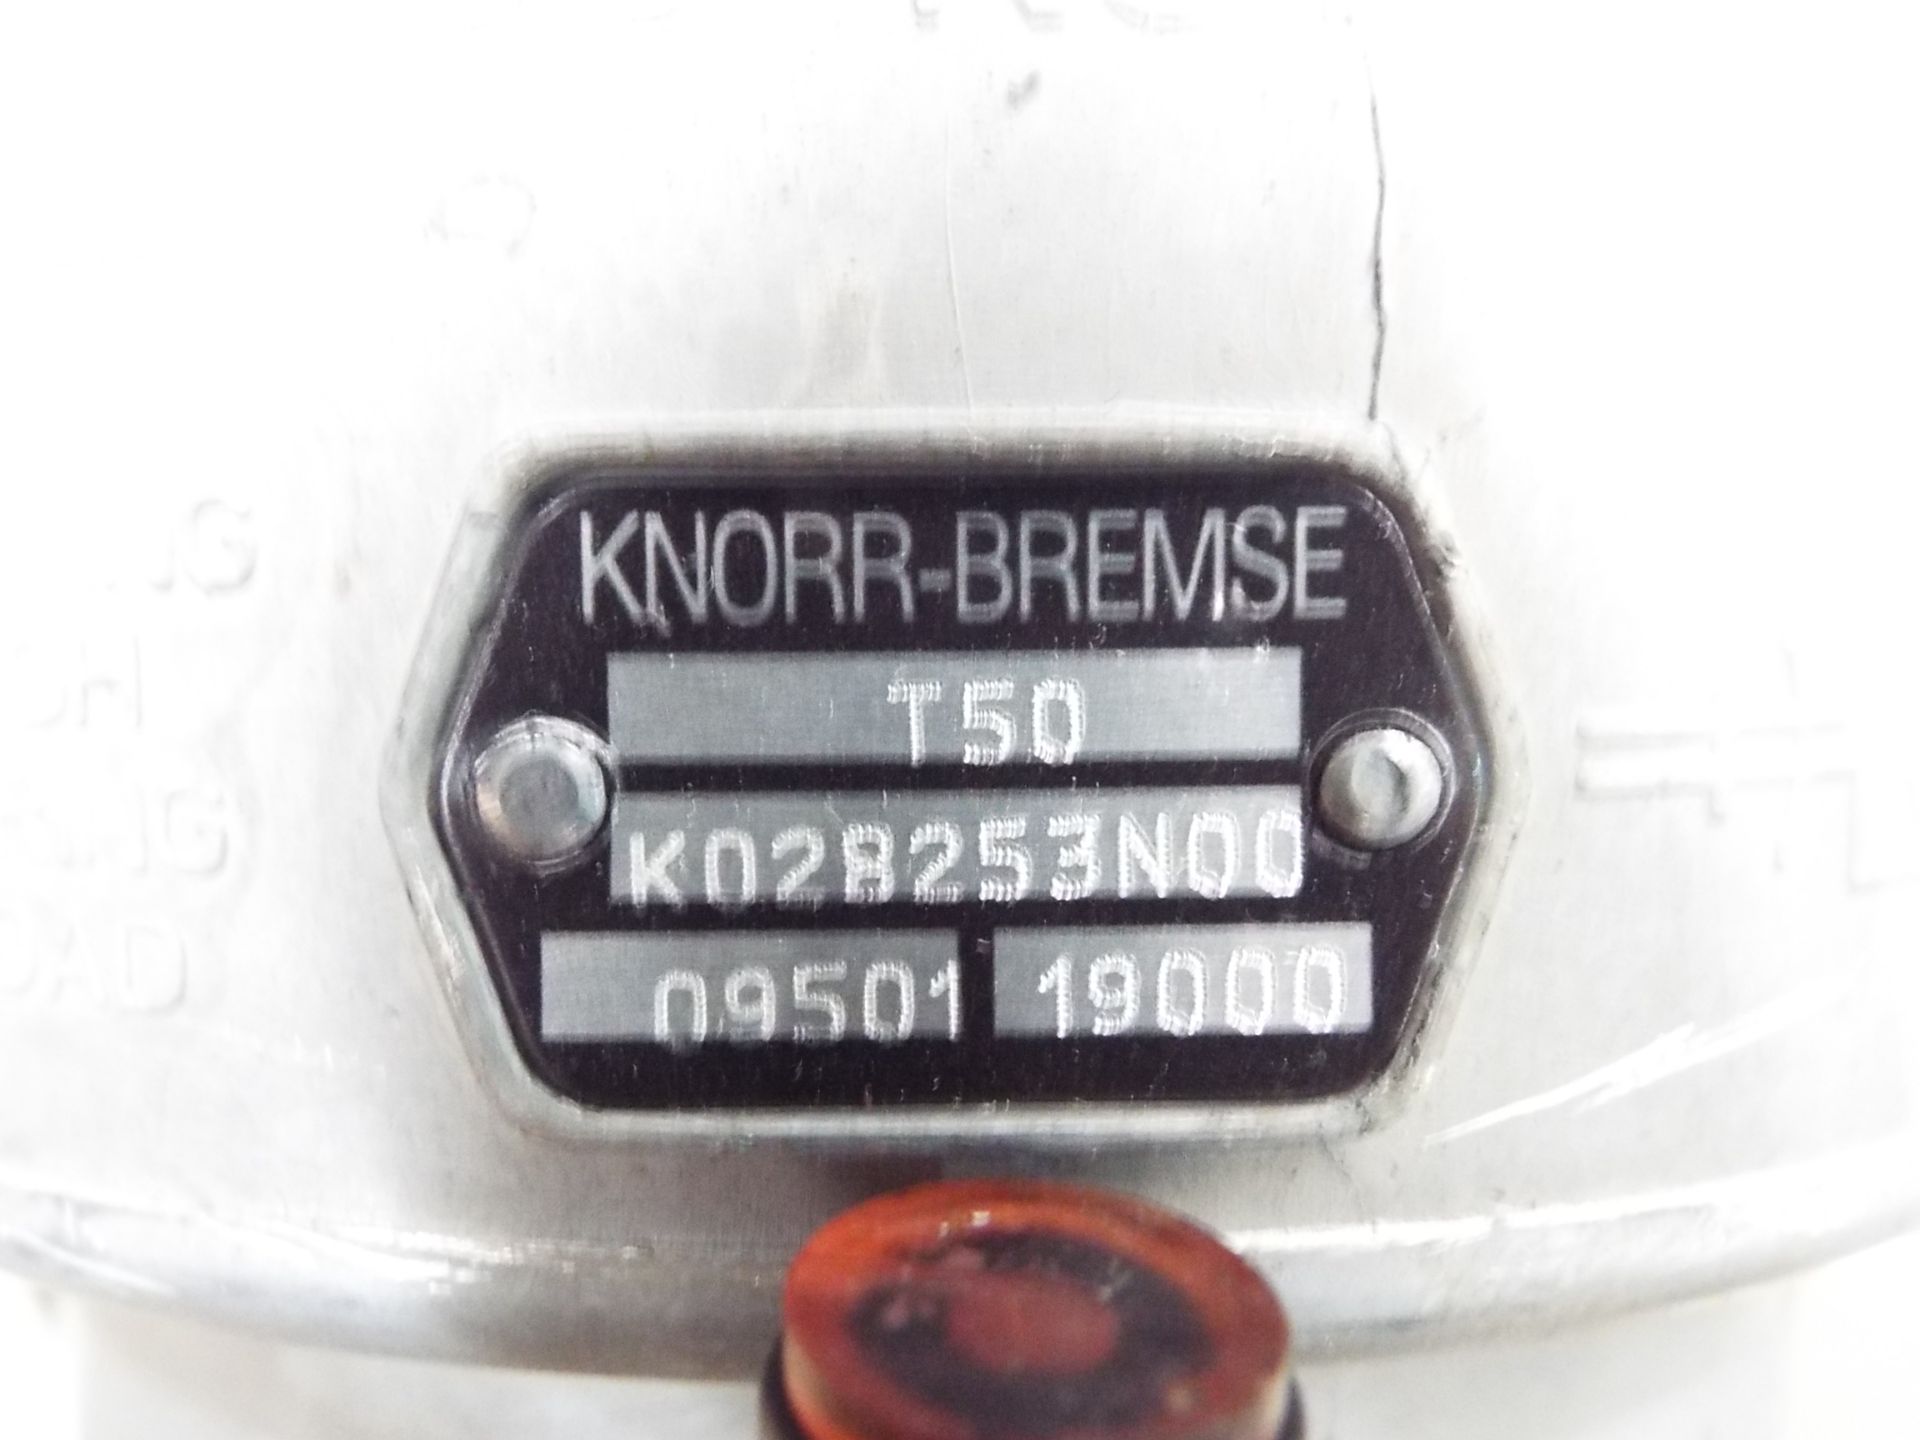 7 x Knorr-Bremse T50 Brake Chambers - Image 3 of 4